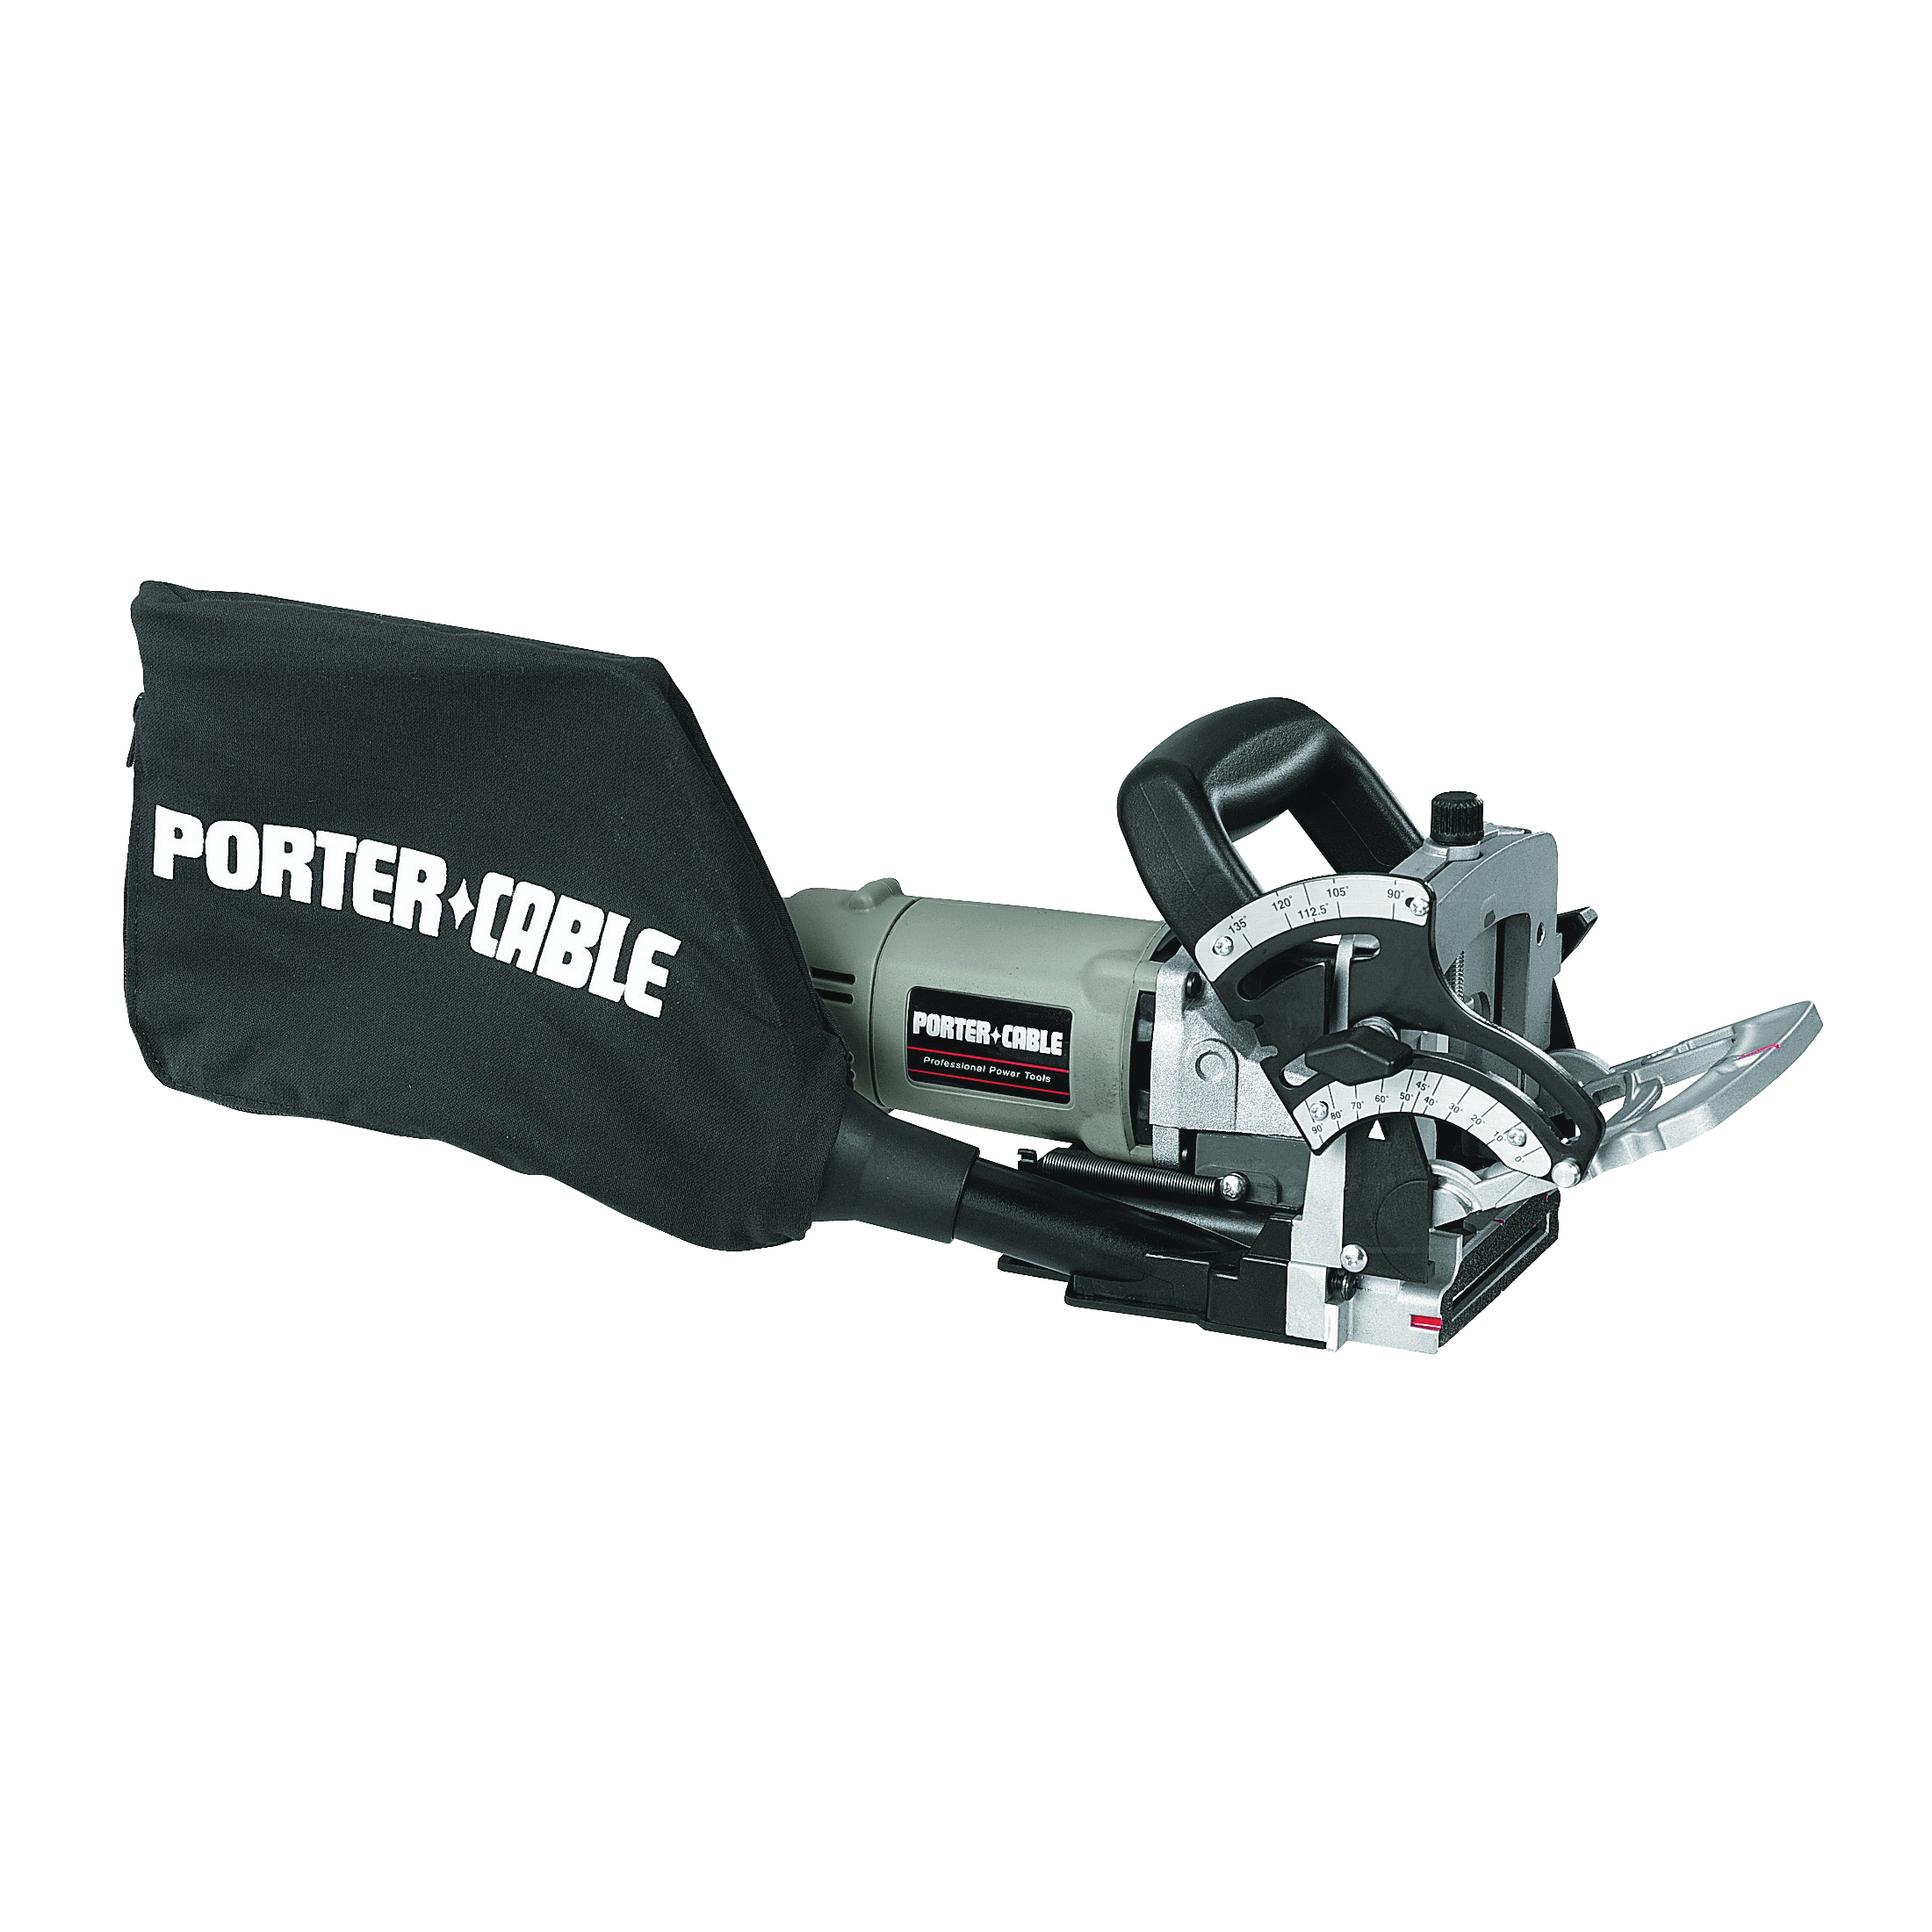 Porter-cable 557